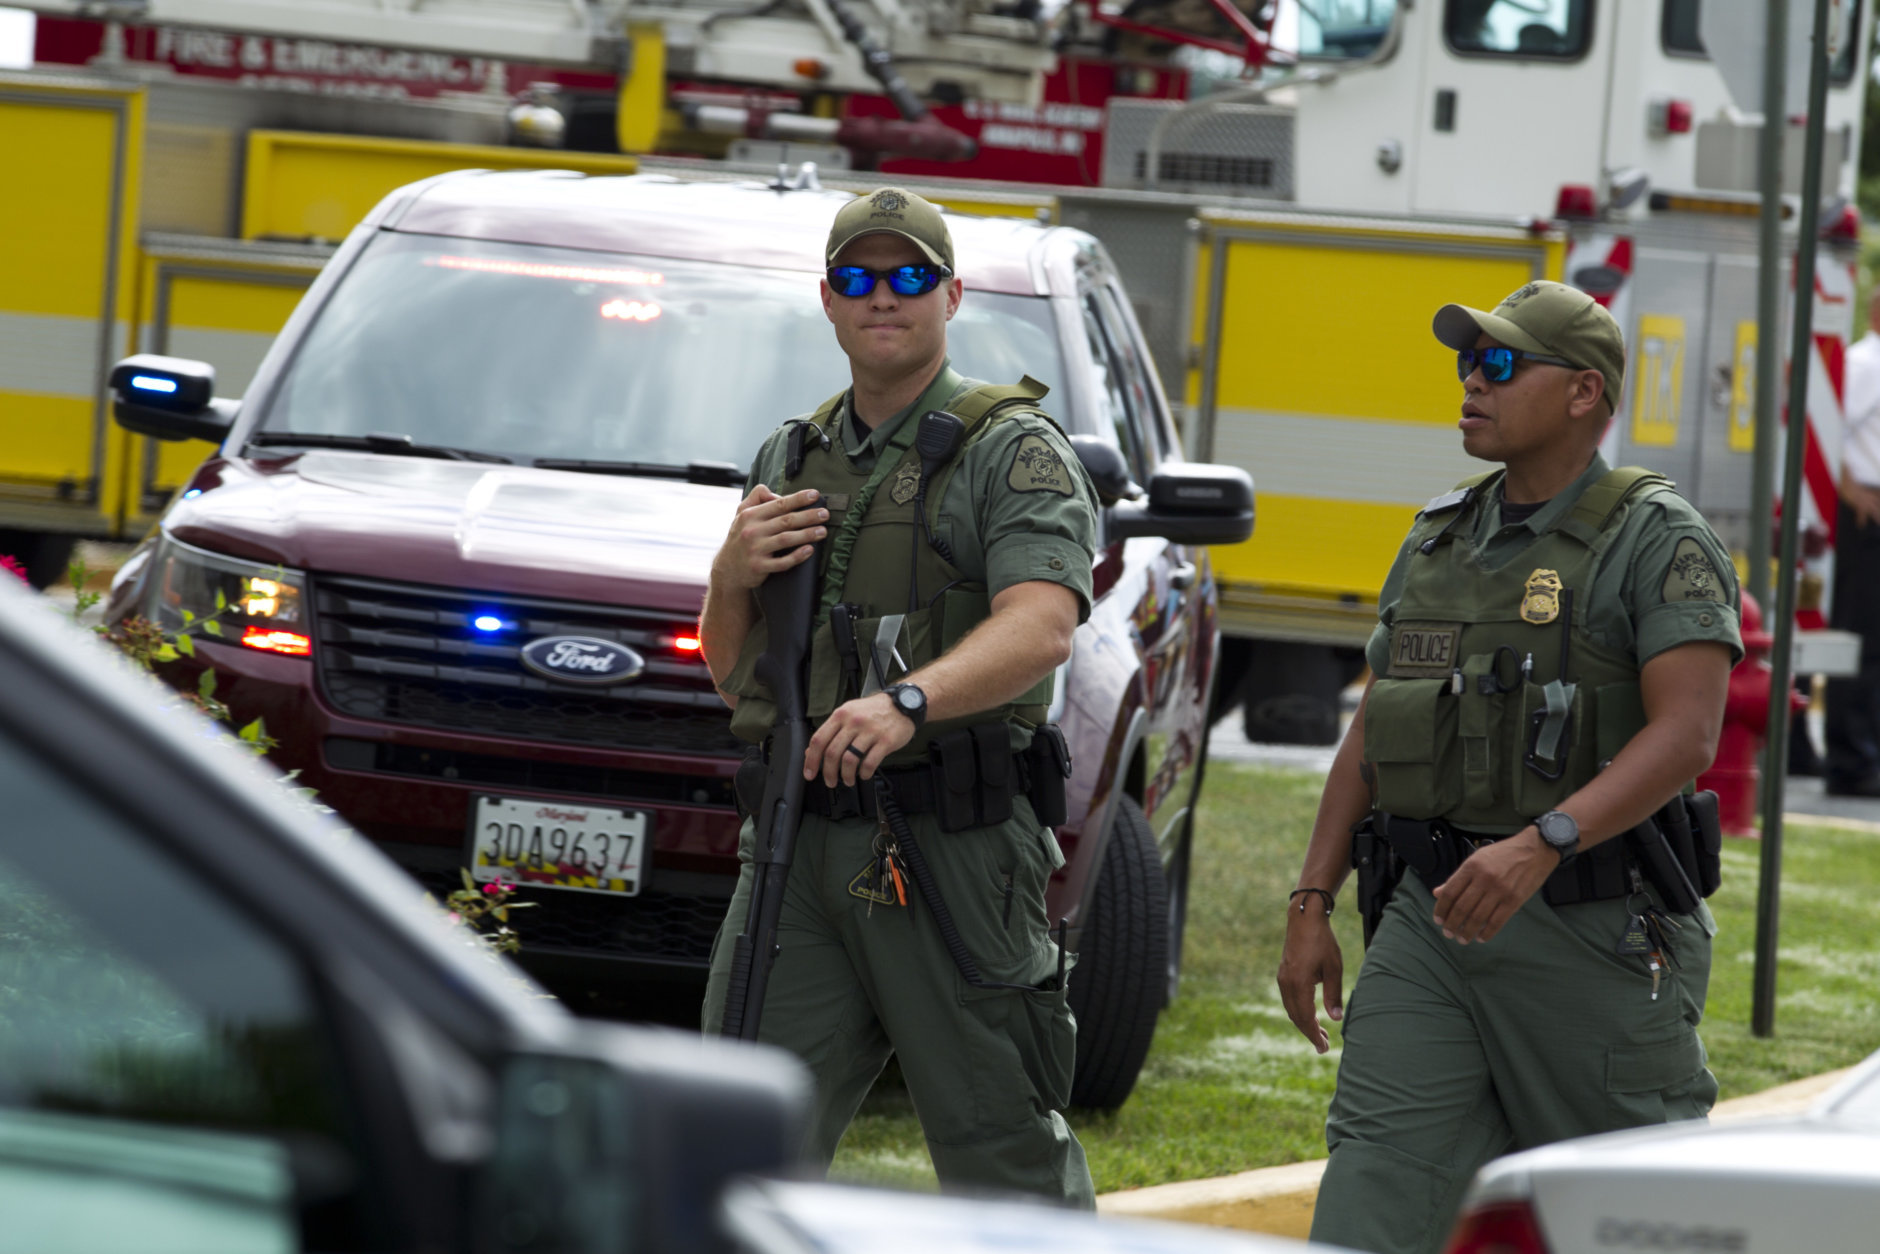 Maryland police officers patrol the area after multiple people were shot at at The Capital Gazette newspaper in Annapolis, Md., Thursday, June 28, 2018. (AP Photo/Jose Luis Magana)